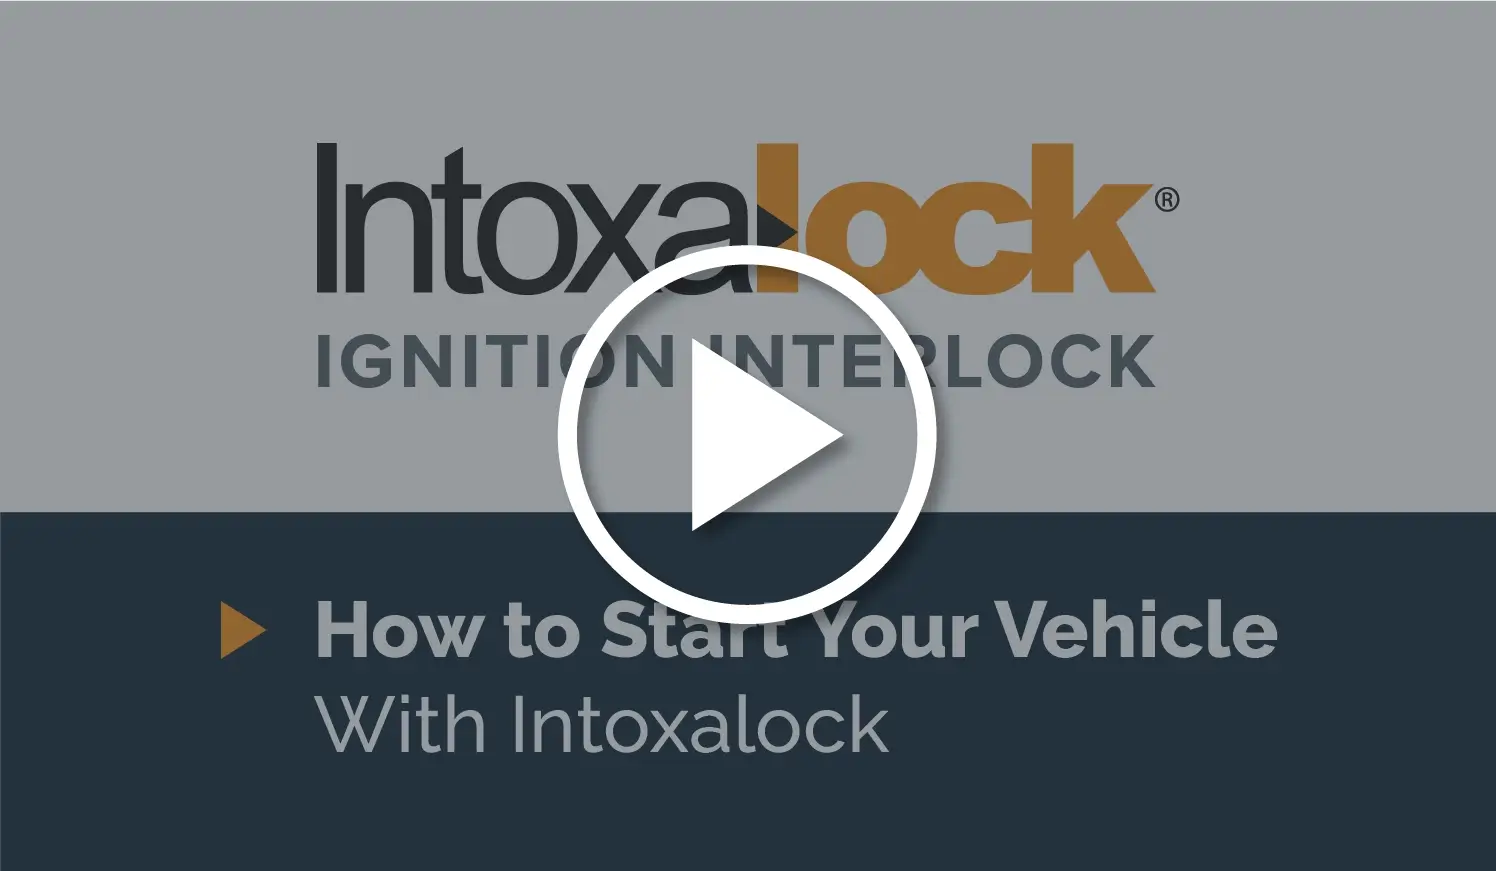 Watch Video: How to Start Your Vehicle